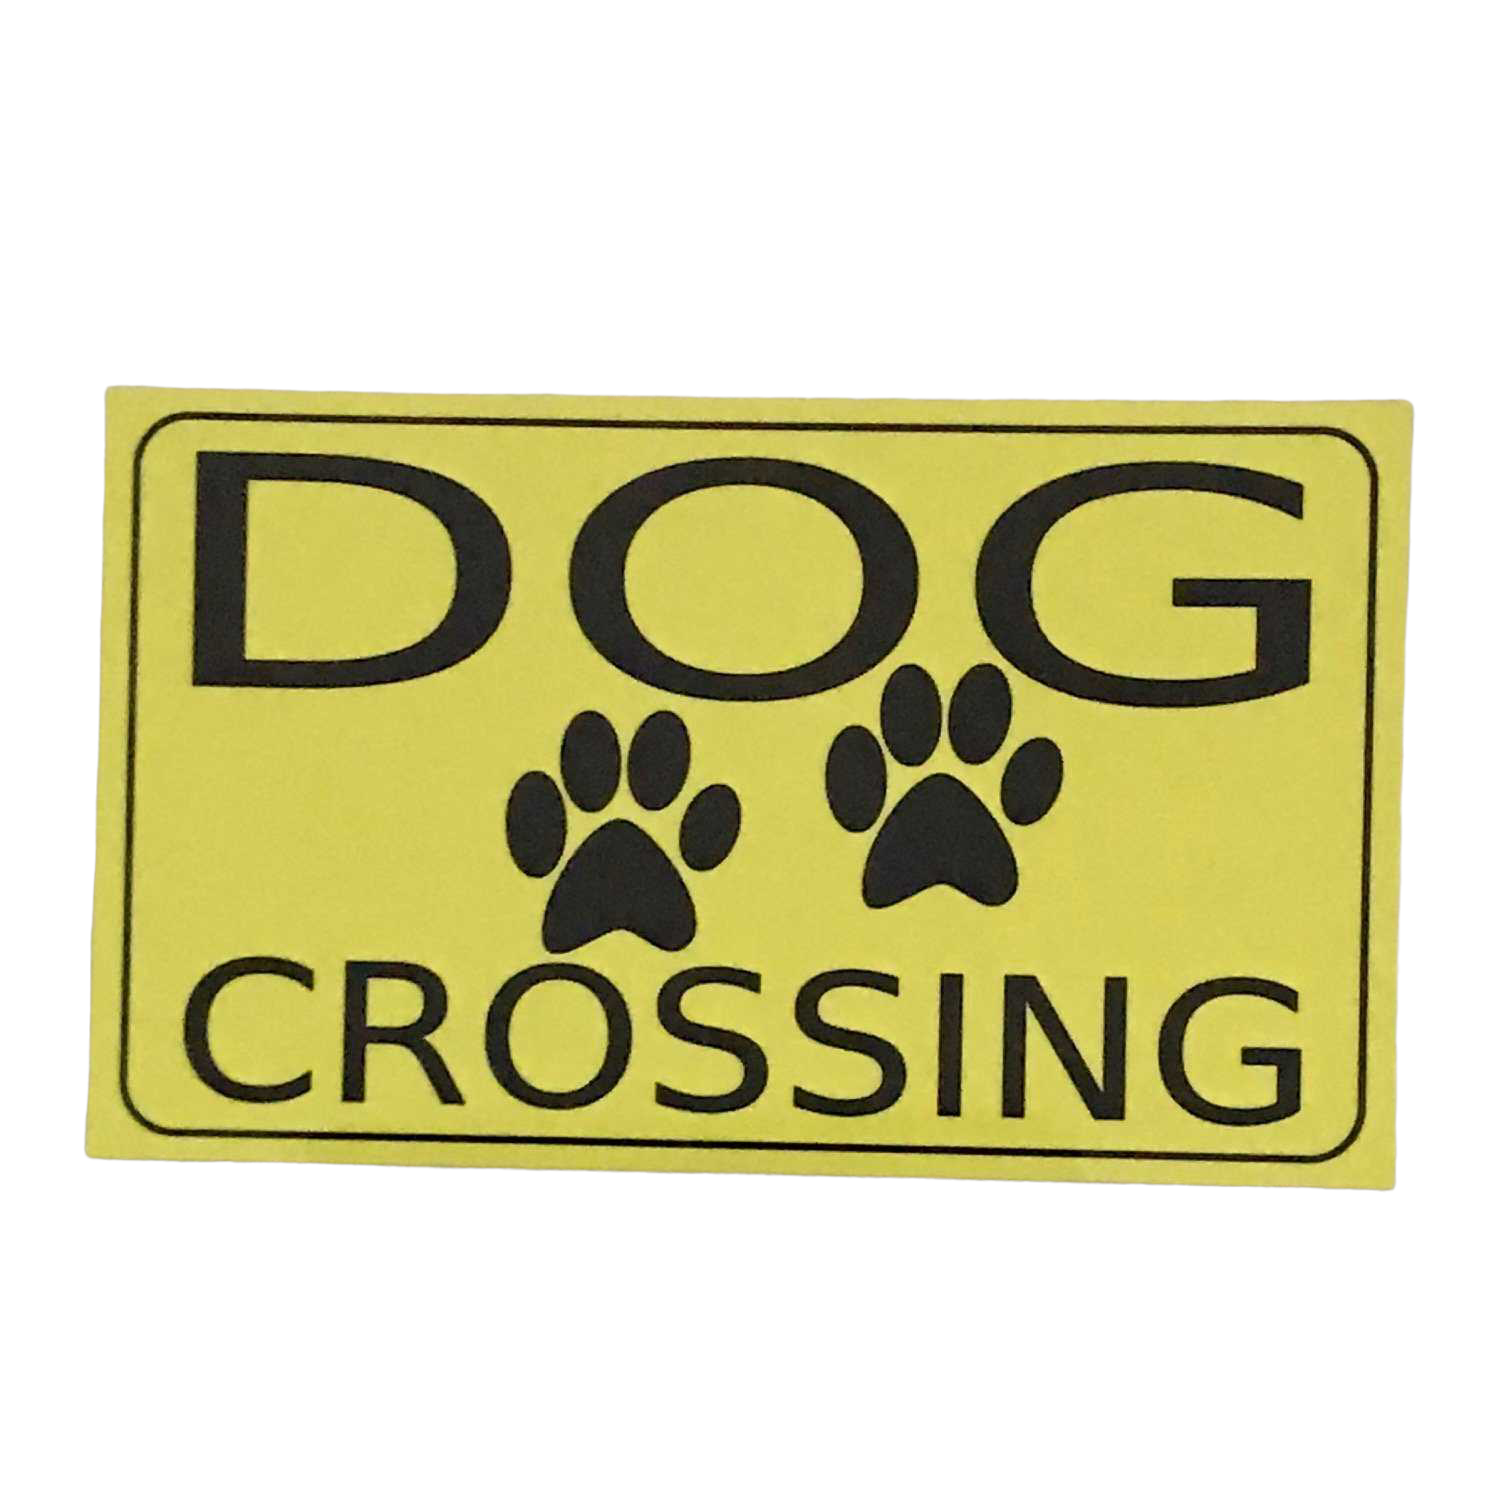 Dog Crossing Sign - The Renmy Store Homewares & Gifts 